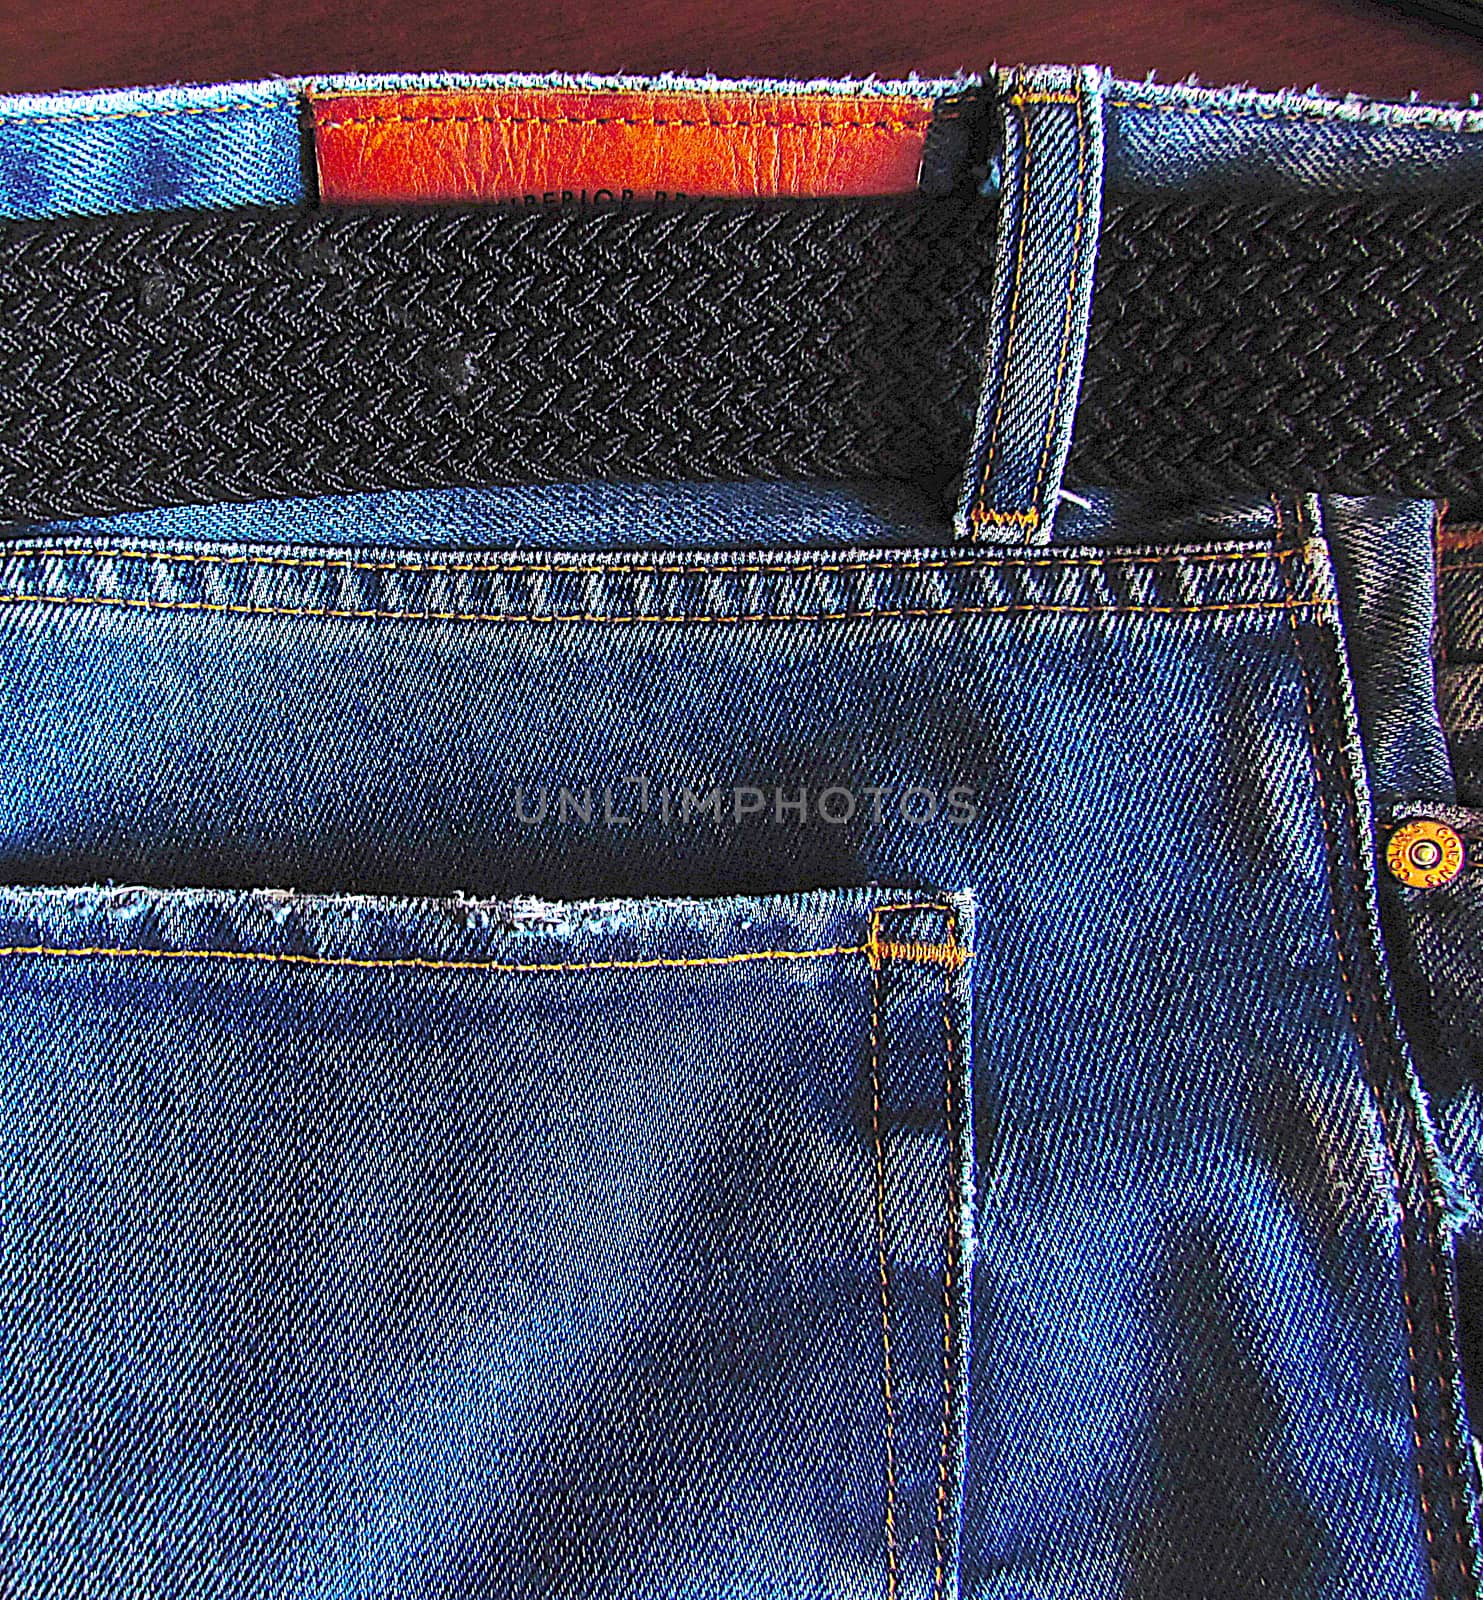 texture of denim, denim material with by Grishakov